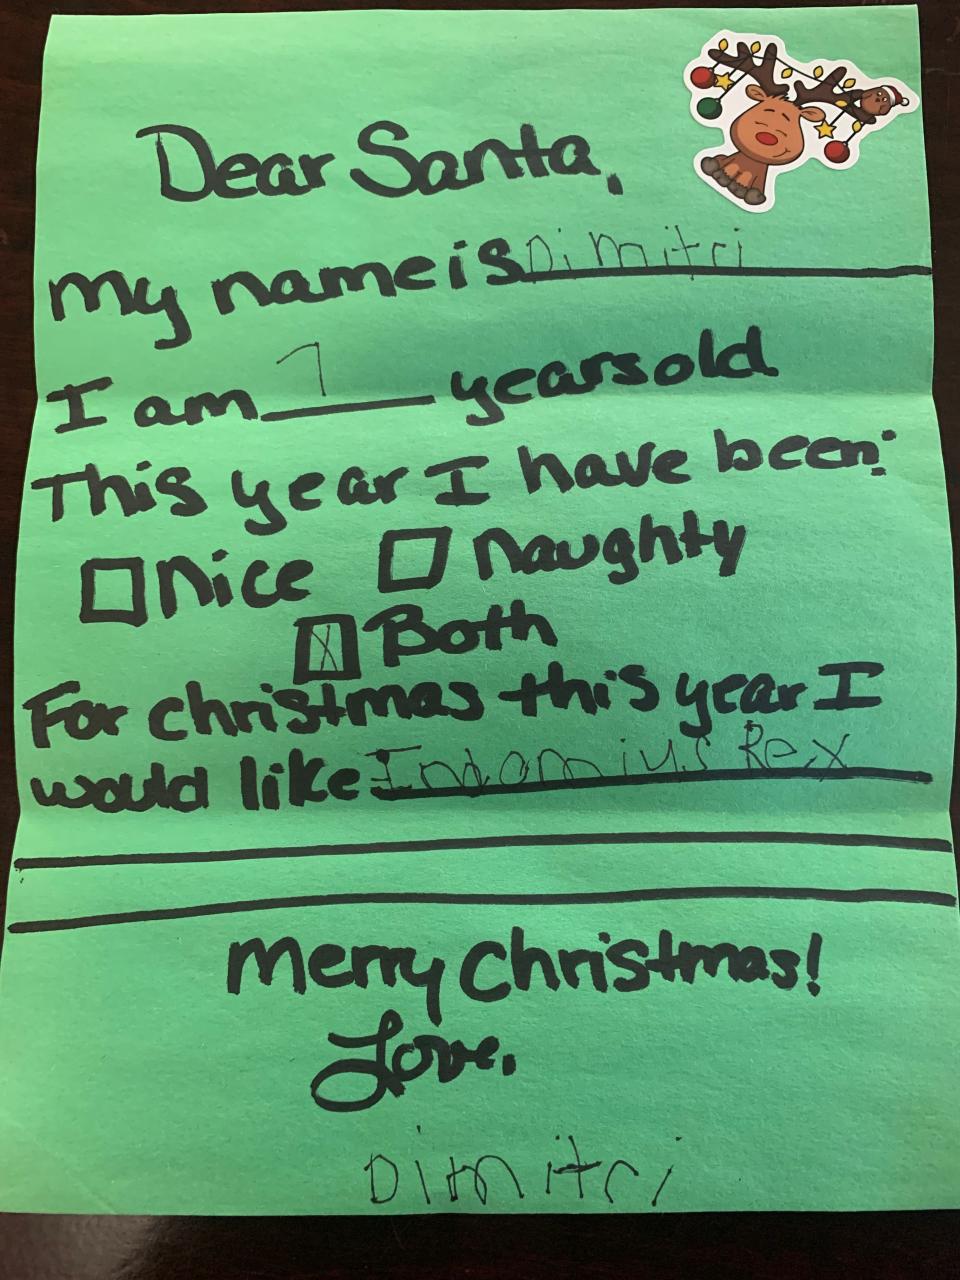 Another Santa letter that came into the Canton Parks and Recreation Department this year.